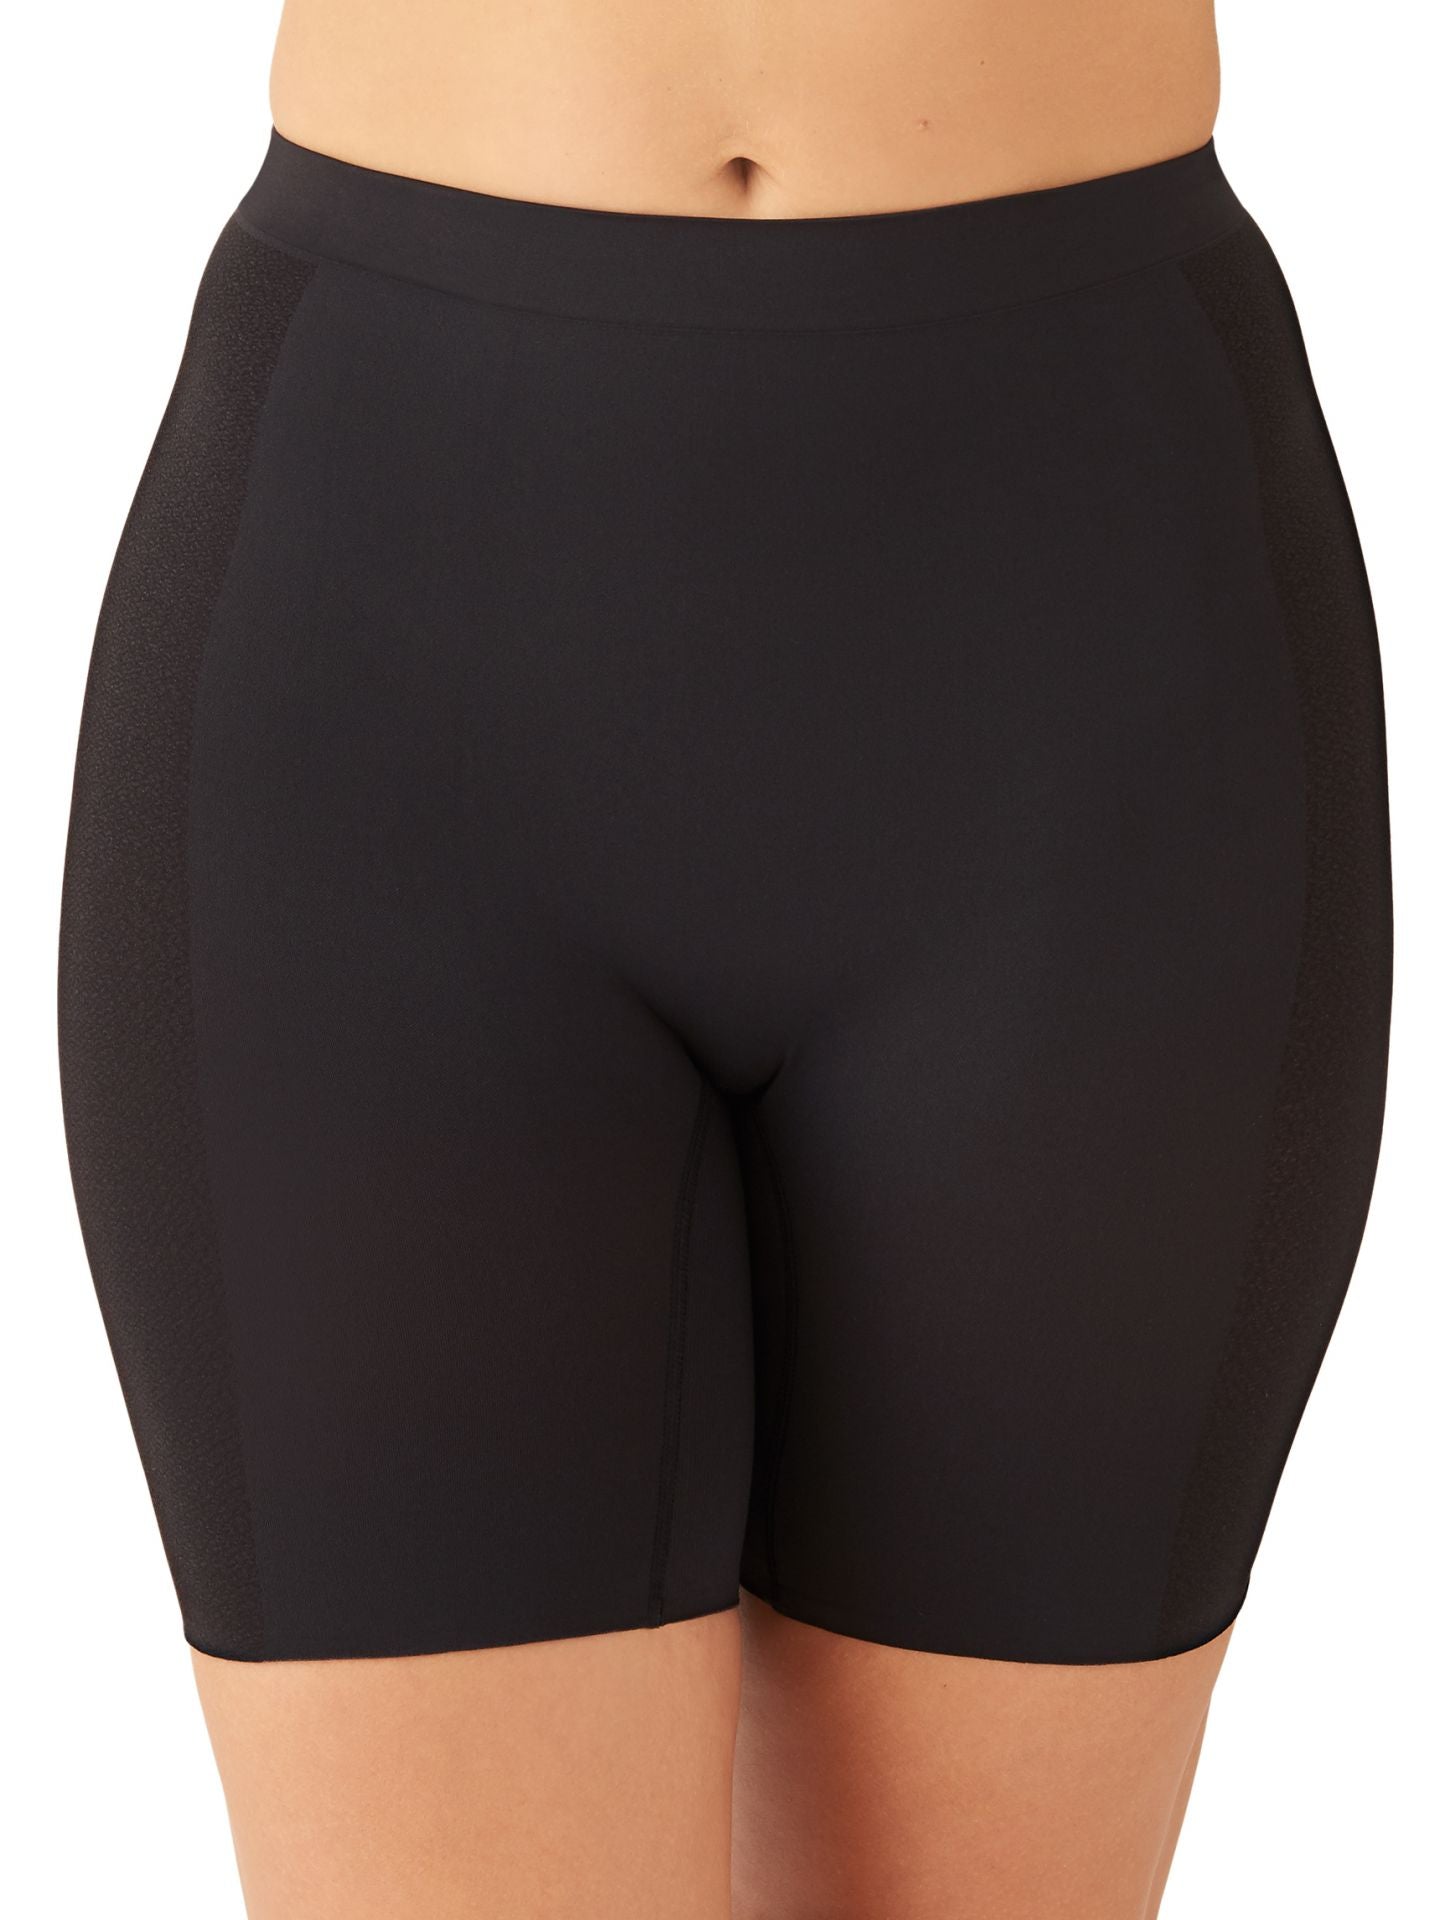 Women's Keep Your Cool Thigh Shaper